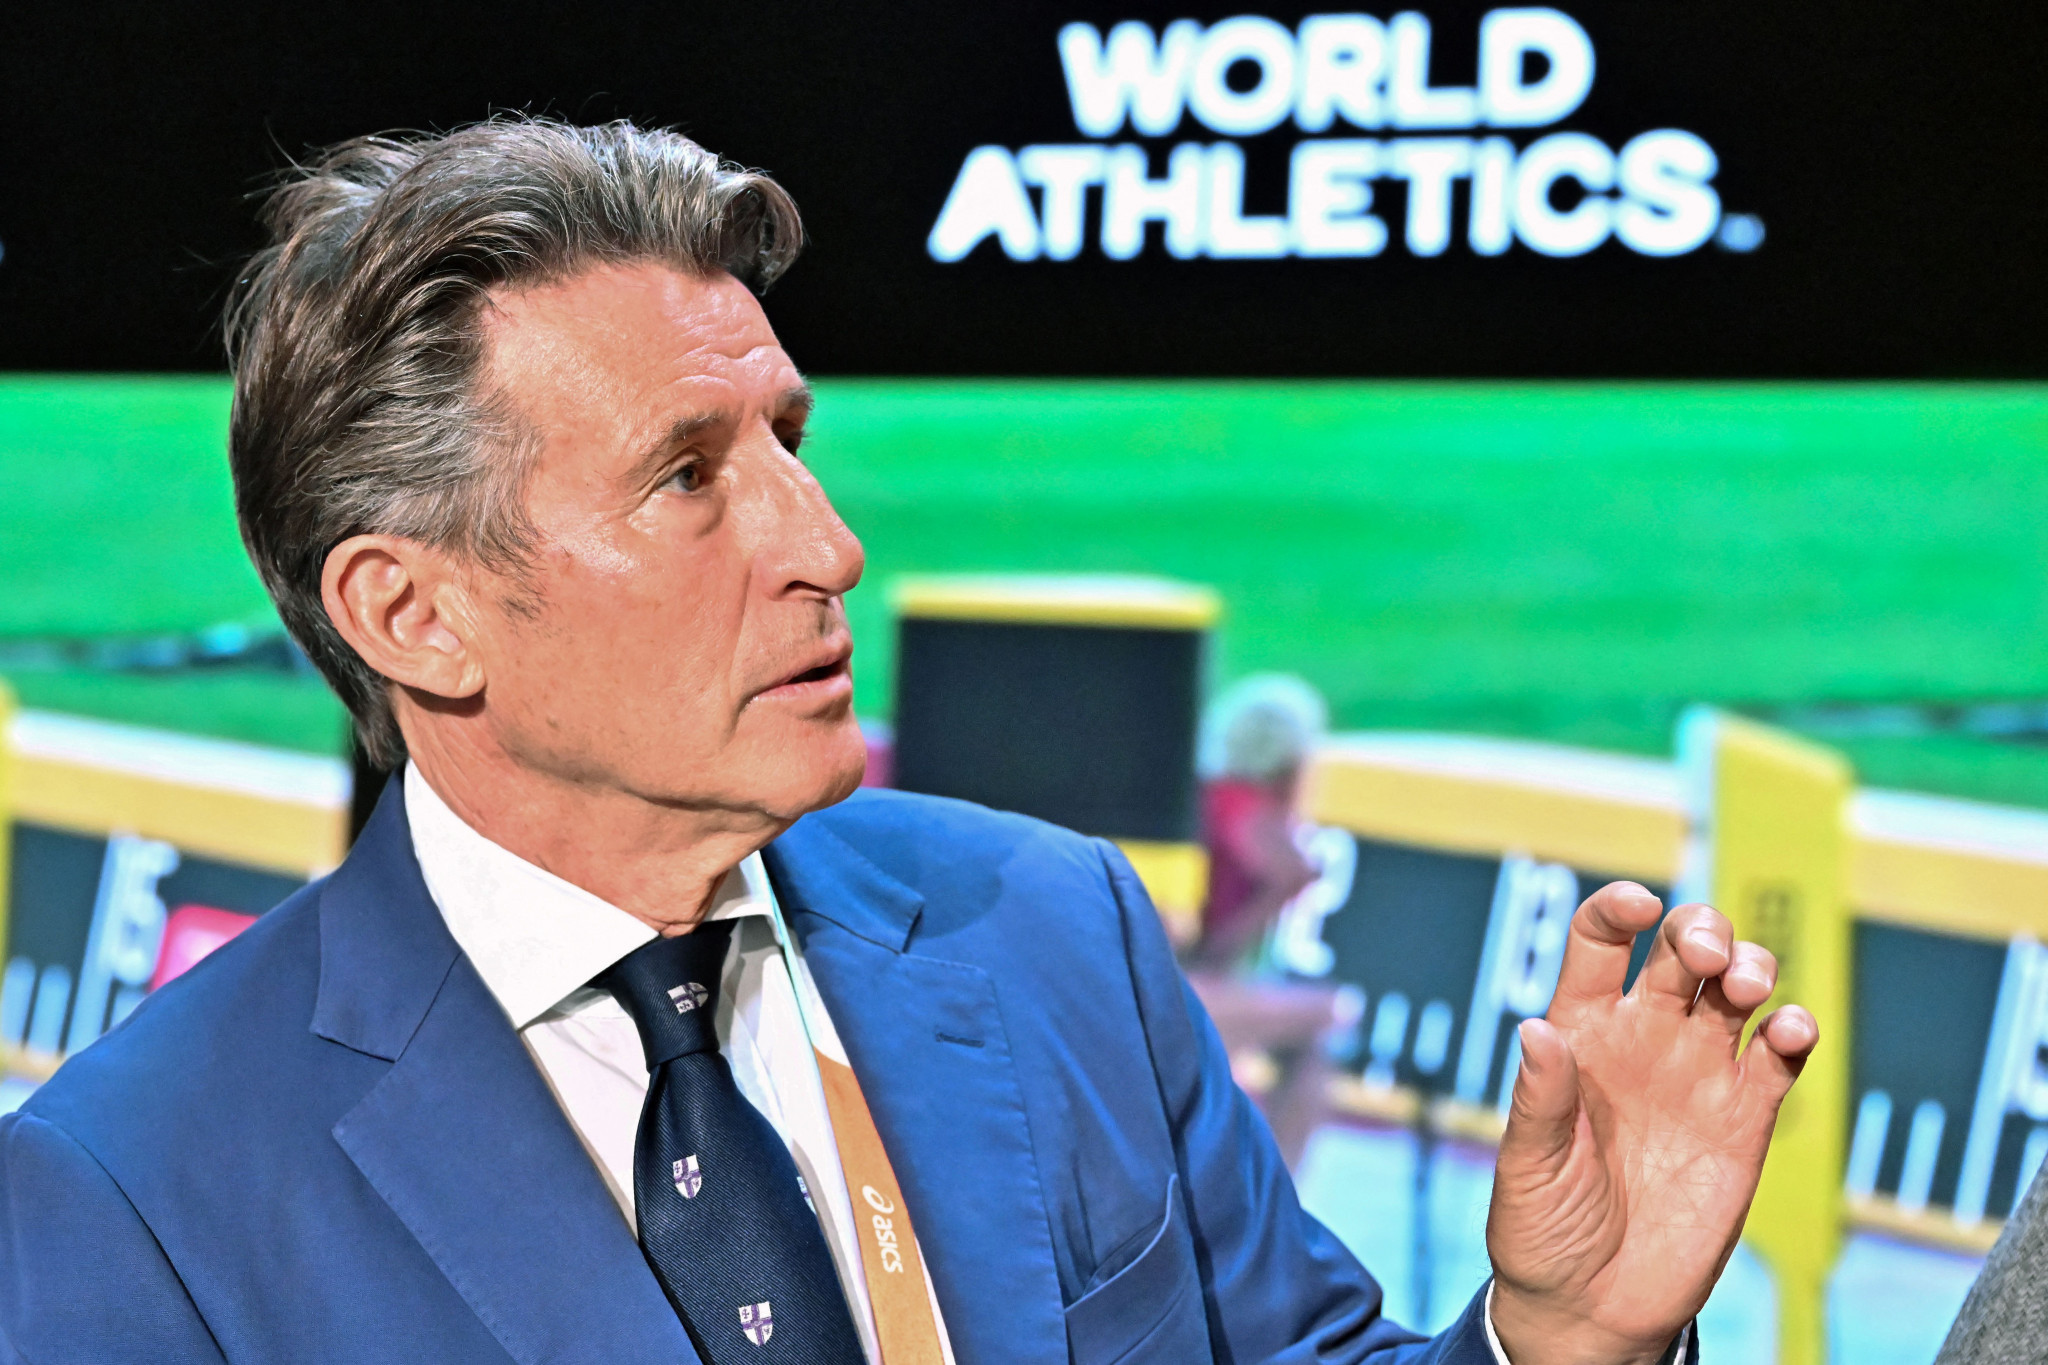 World Athletics President Sebastian Coe explained the appeals division would provide a cheaper and quicker mechanism than taking cases to the Court of Arbitration for Sport ©Getty Images